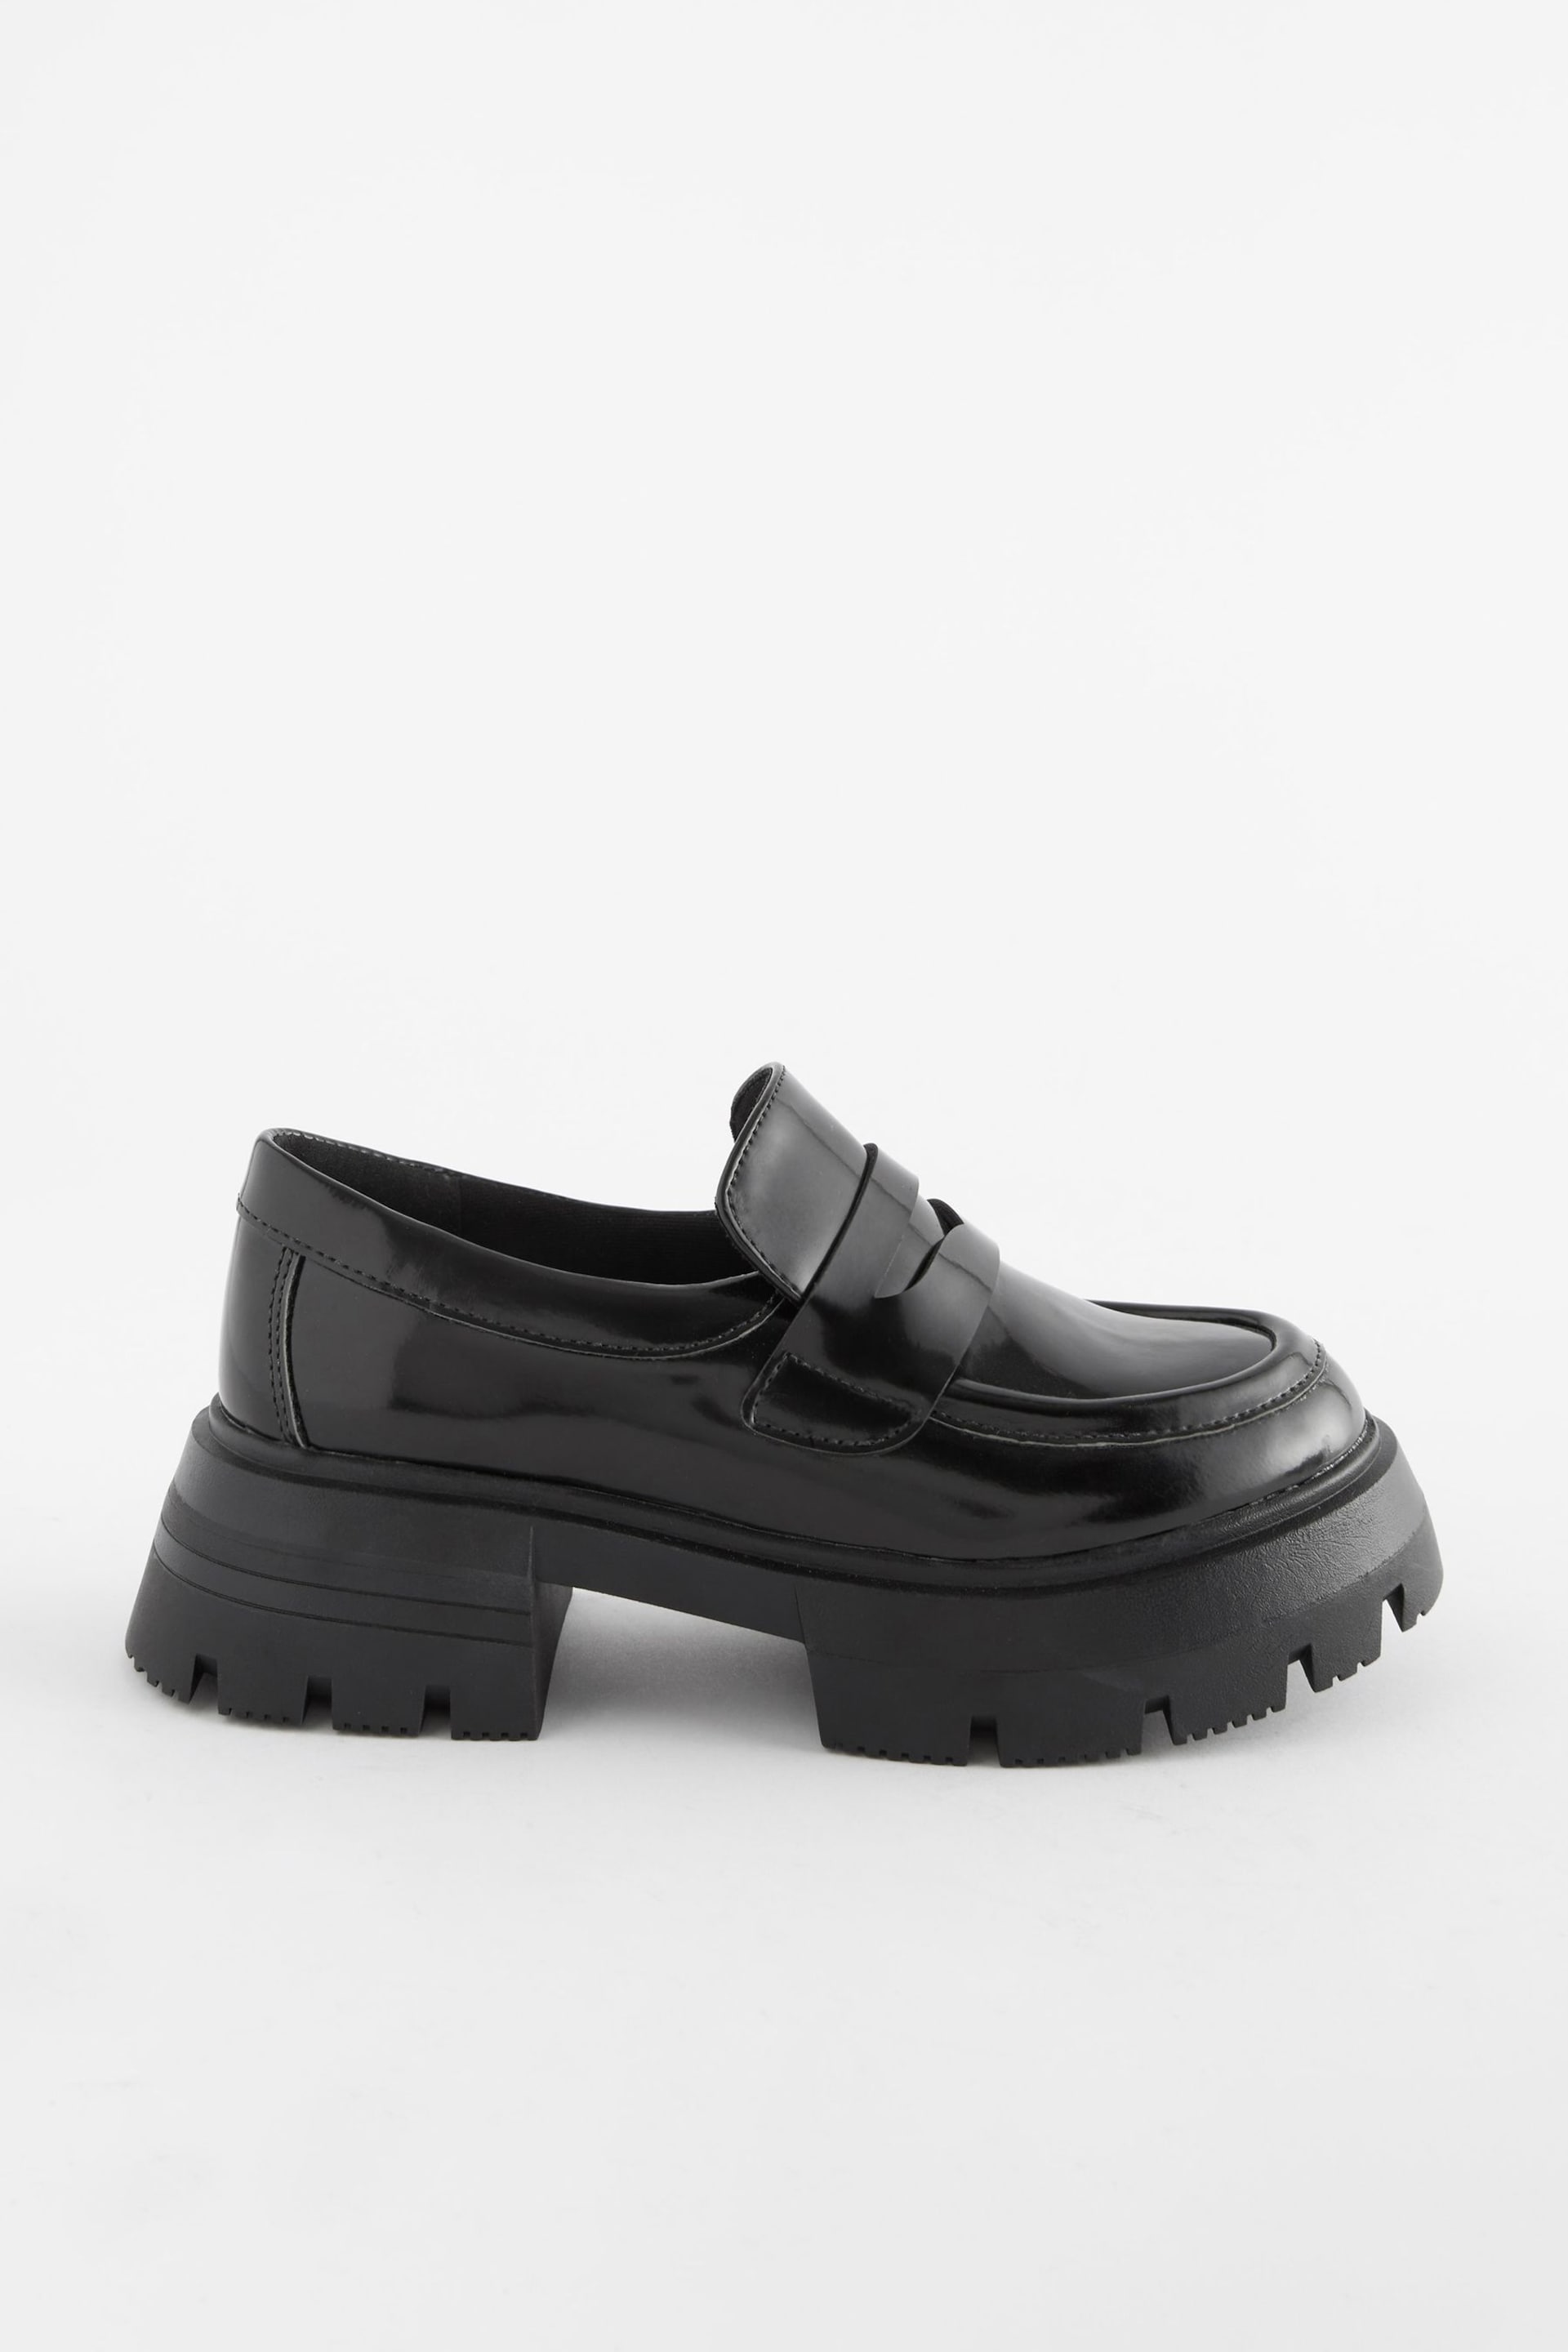 Black Patent Chunky School Shoes - Image 6 of 8